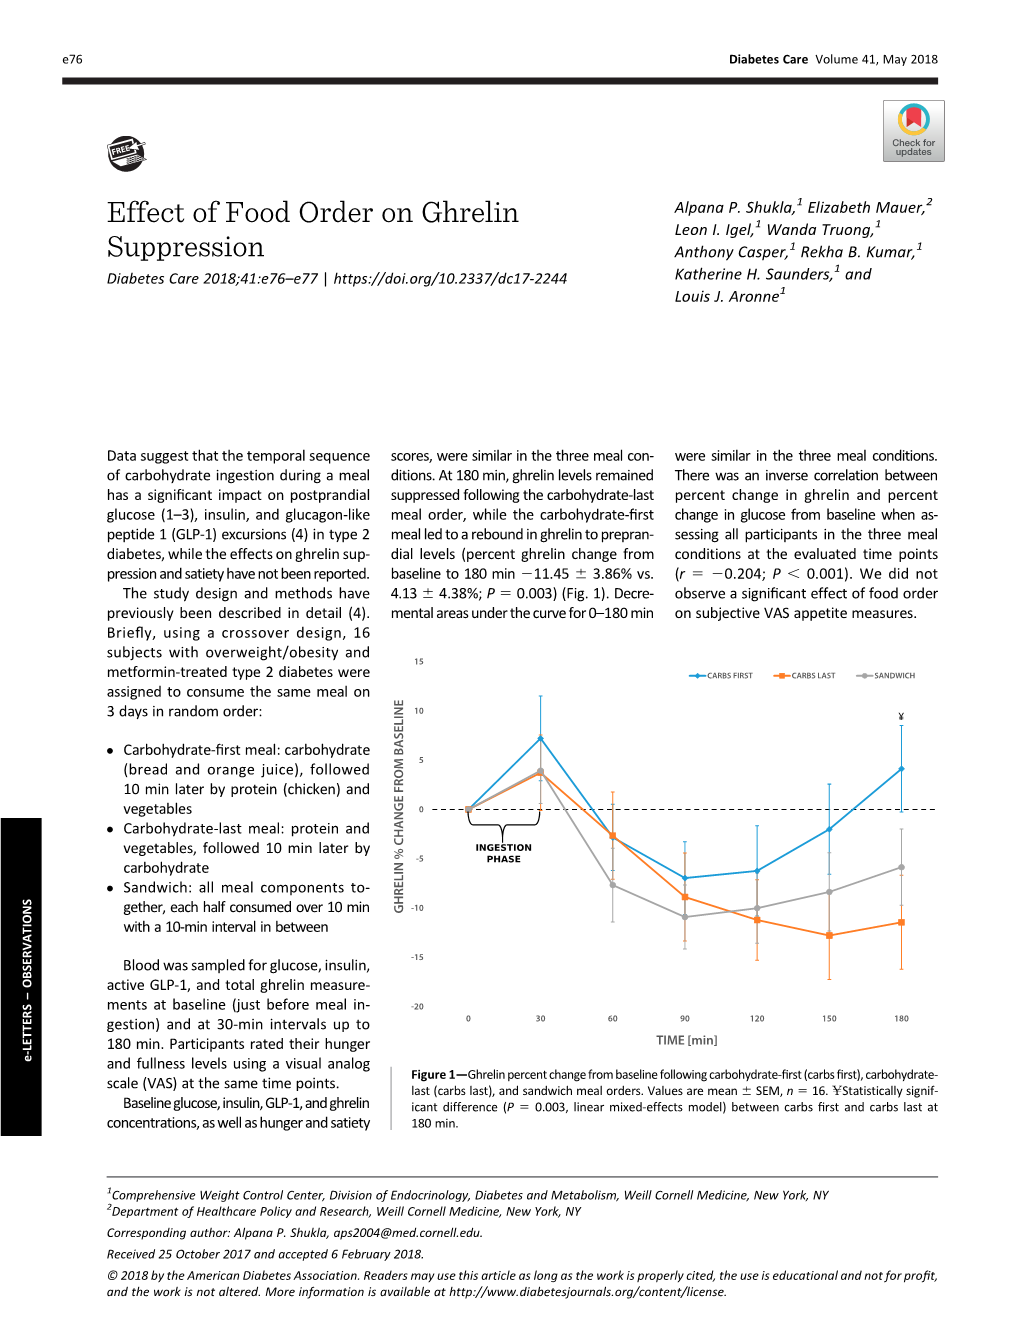 Effect of Food Order on Ghrelin Suppression